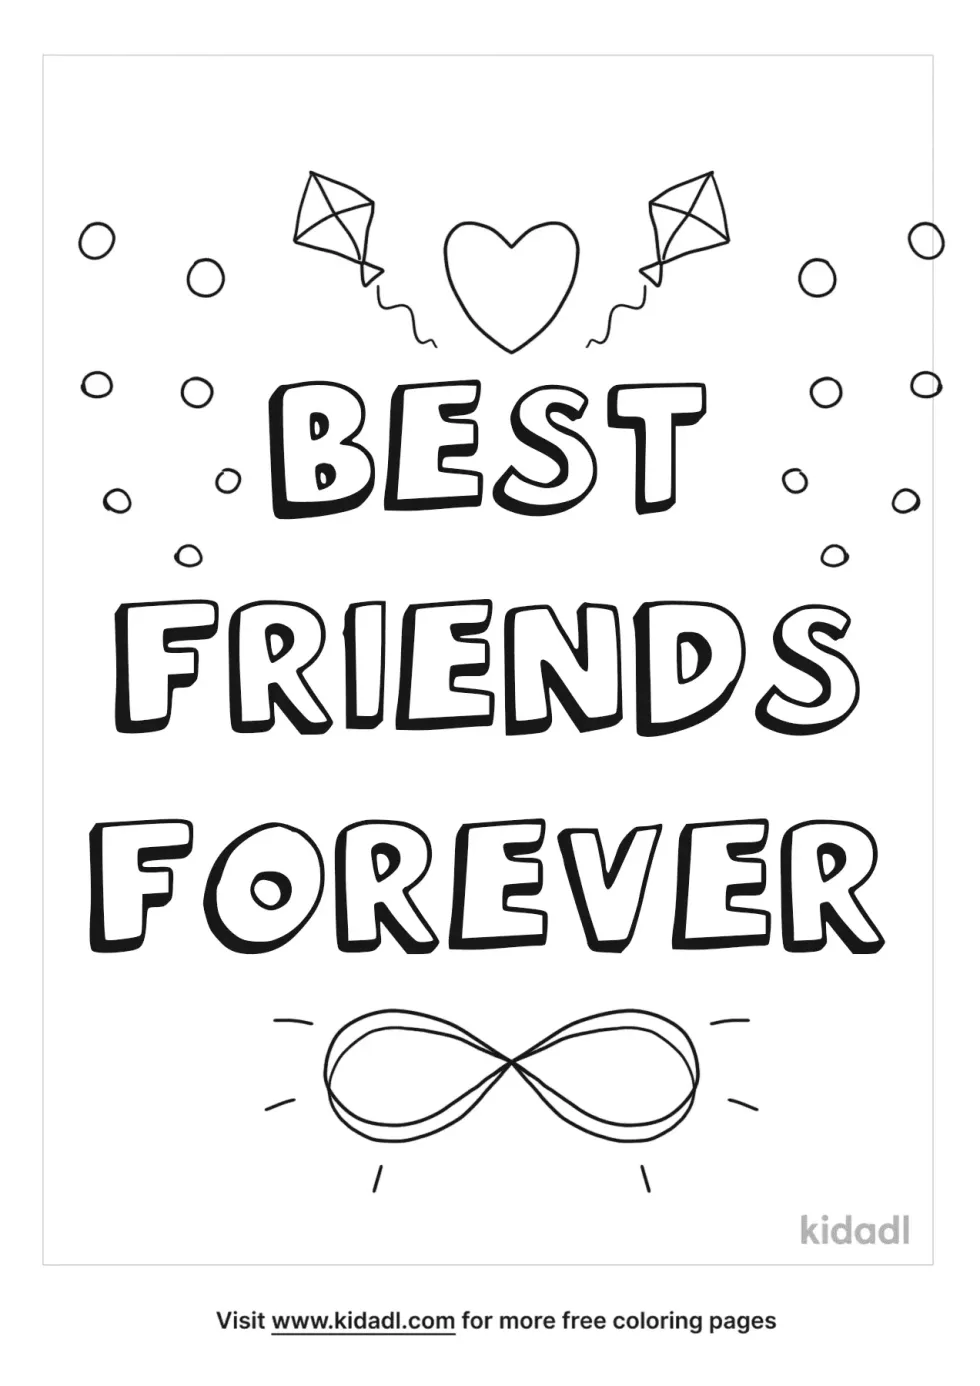 Best Friends Forever Coloring Page